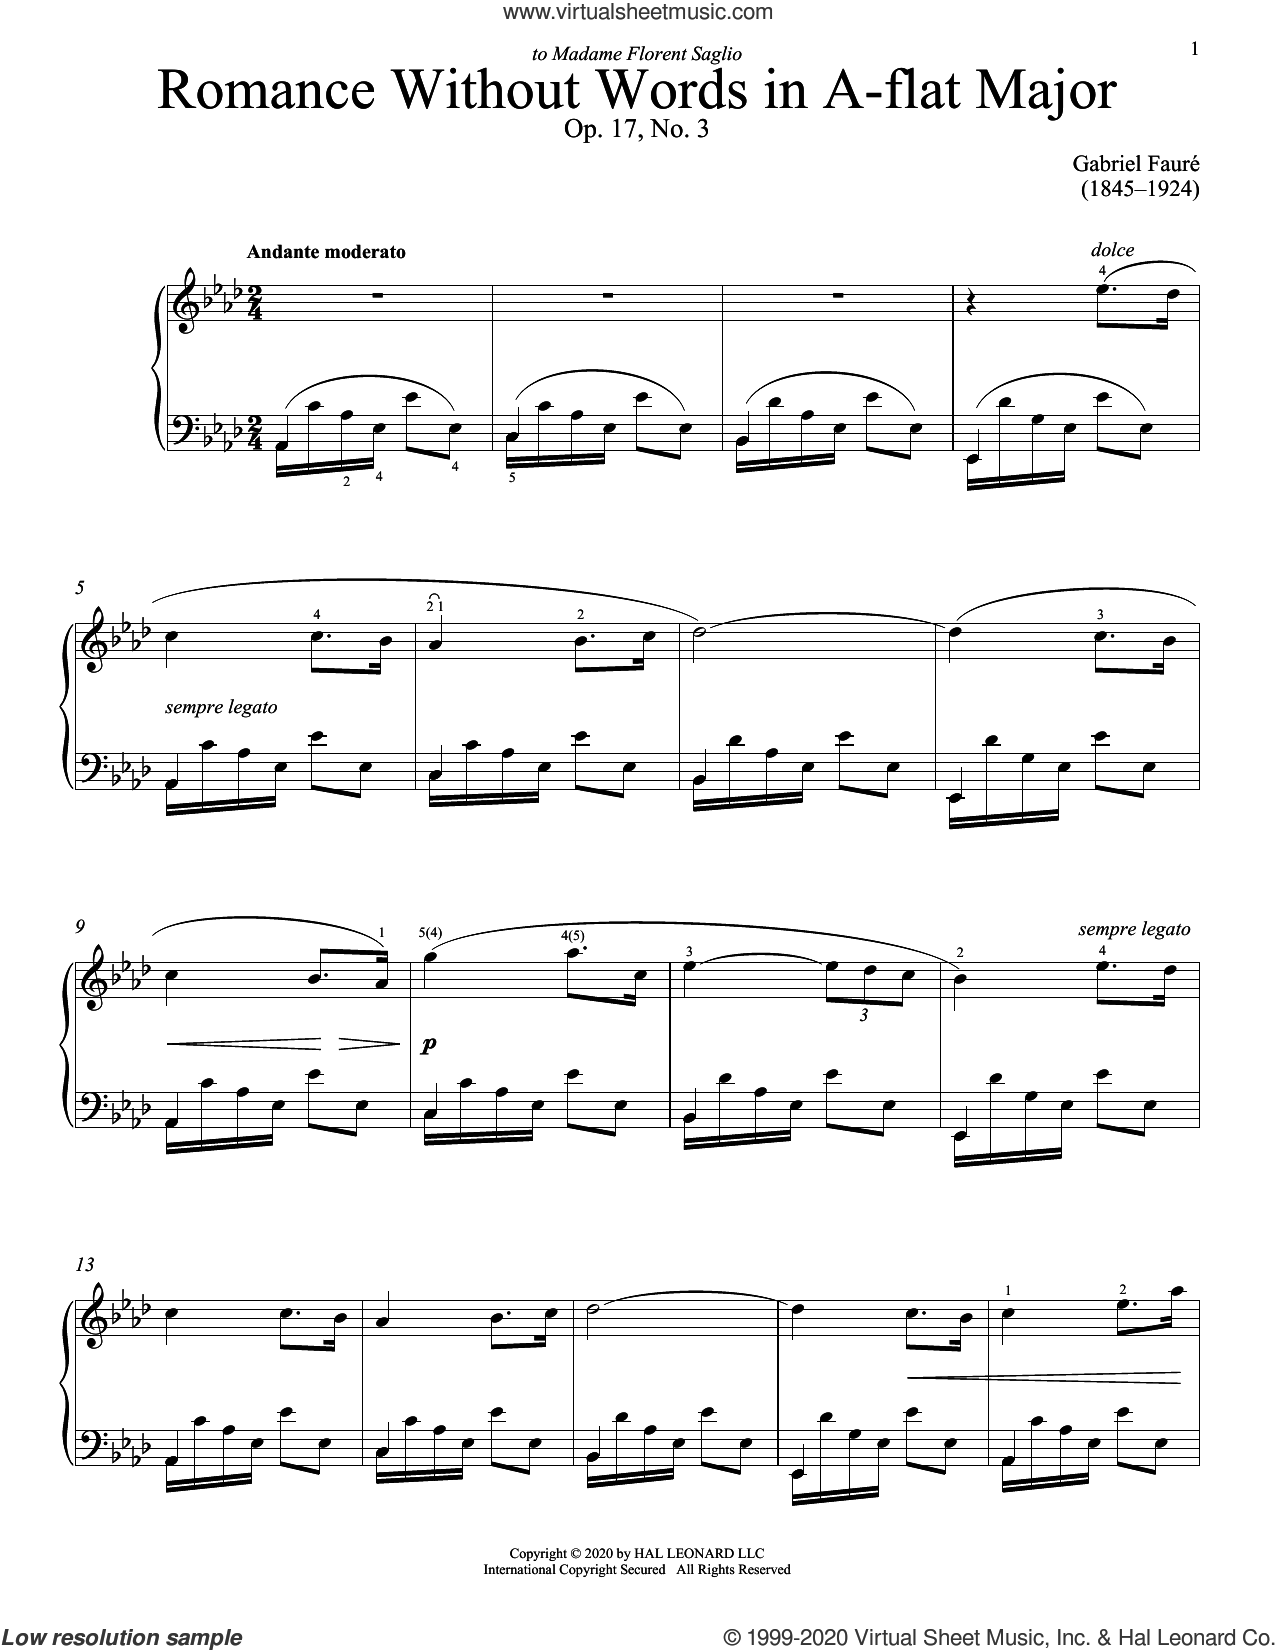 traitor Sheet Music - 36 Arrangements Available Instantly - Musicnotes